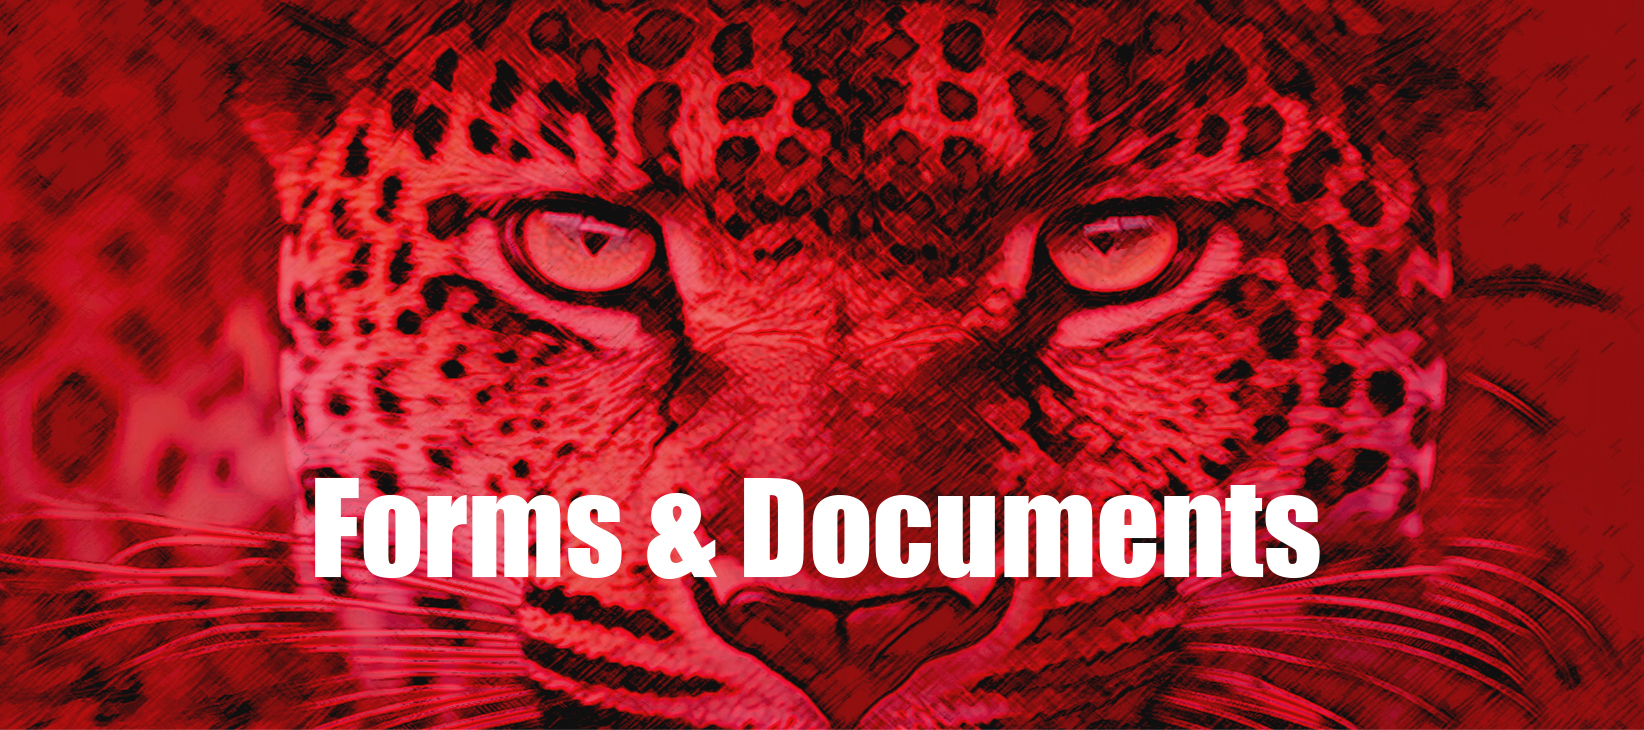 Forms & Documents